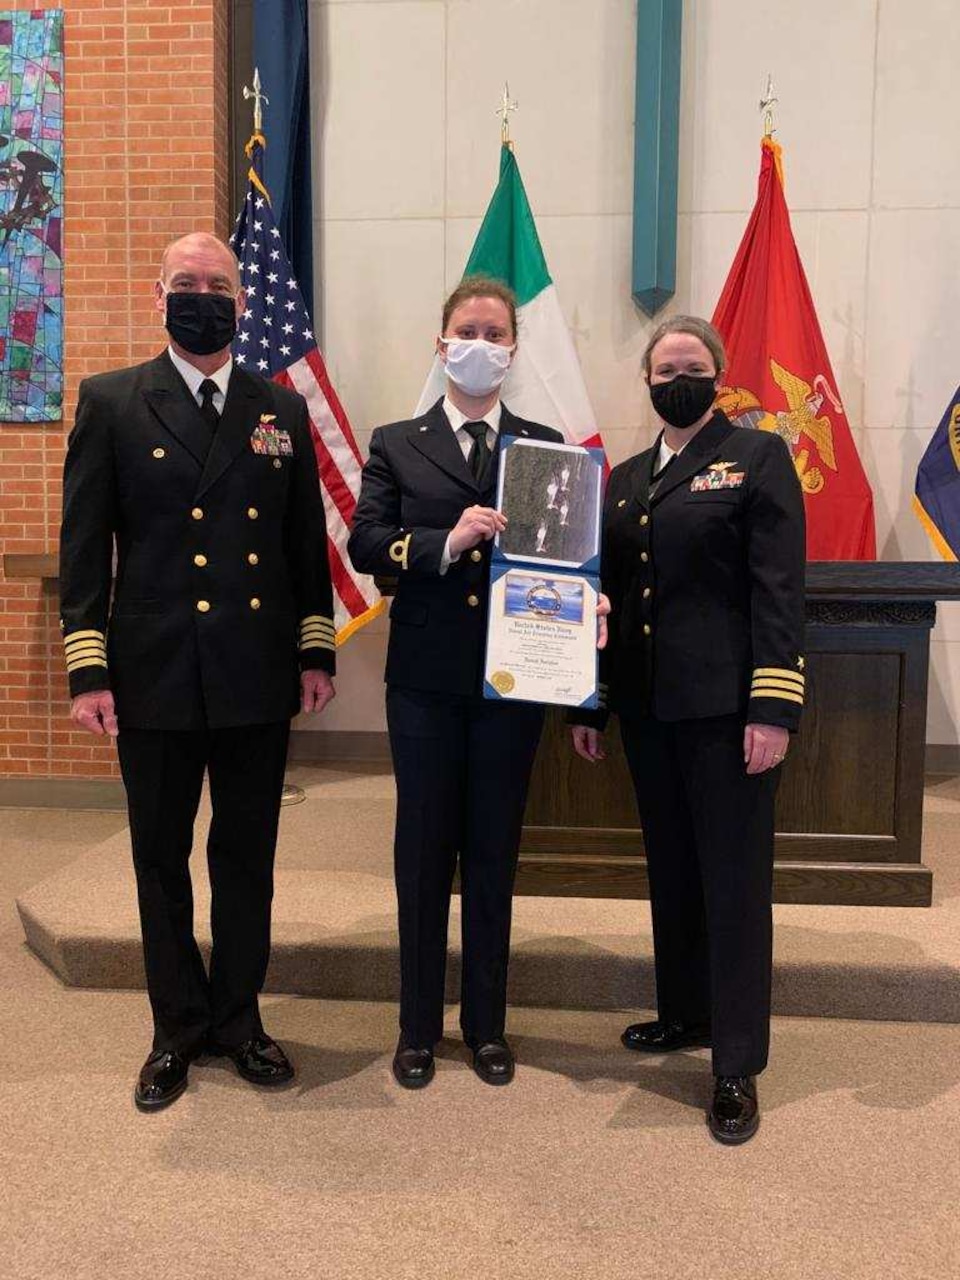 Italian navy Ensign Erika Raballo, center, stands with Commodore, Training Air Wing 1 Capt. Tracey Gendreau, left, and Training Squadron (VT) 9 Commanding Officer Cmdr. Meghan Angermann during her winging ceremony at Naval Air Station Meridian base chapel, March 11.